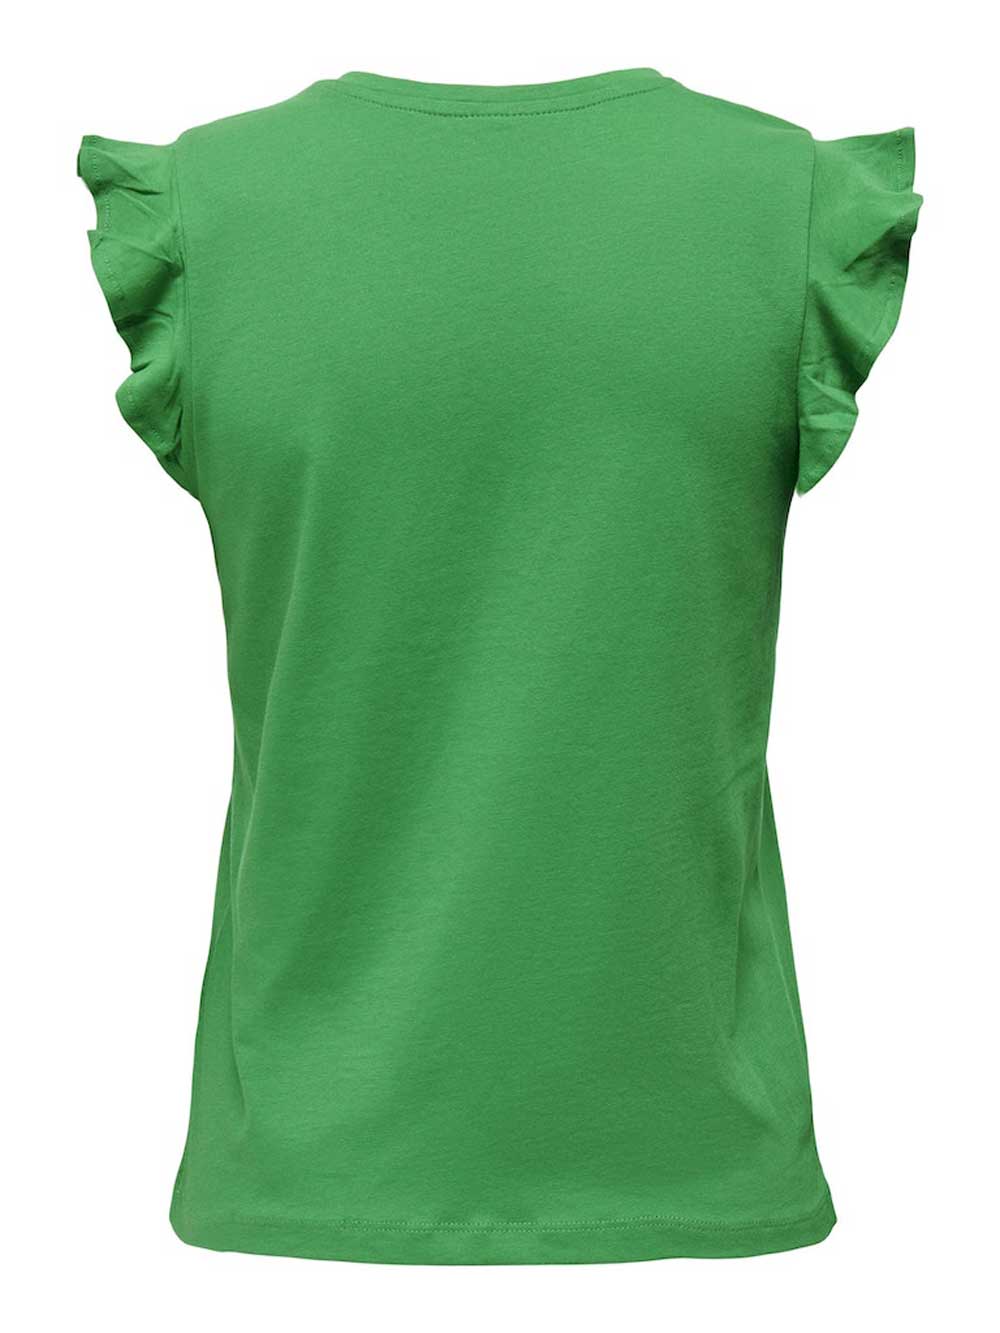 ONLY T-shirts e Tops ONLY da DONNA - Green Bee